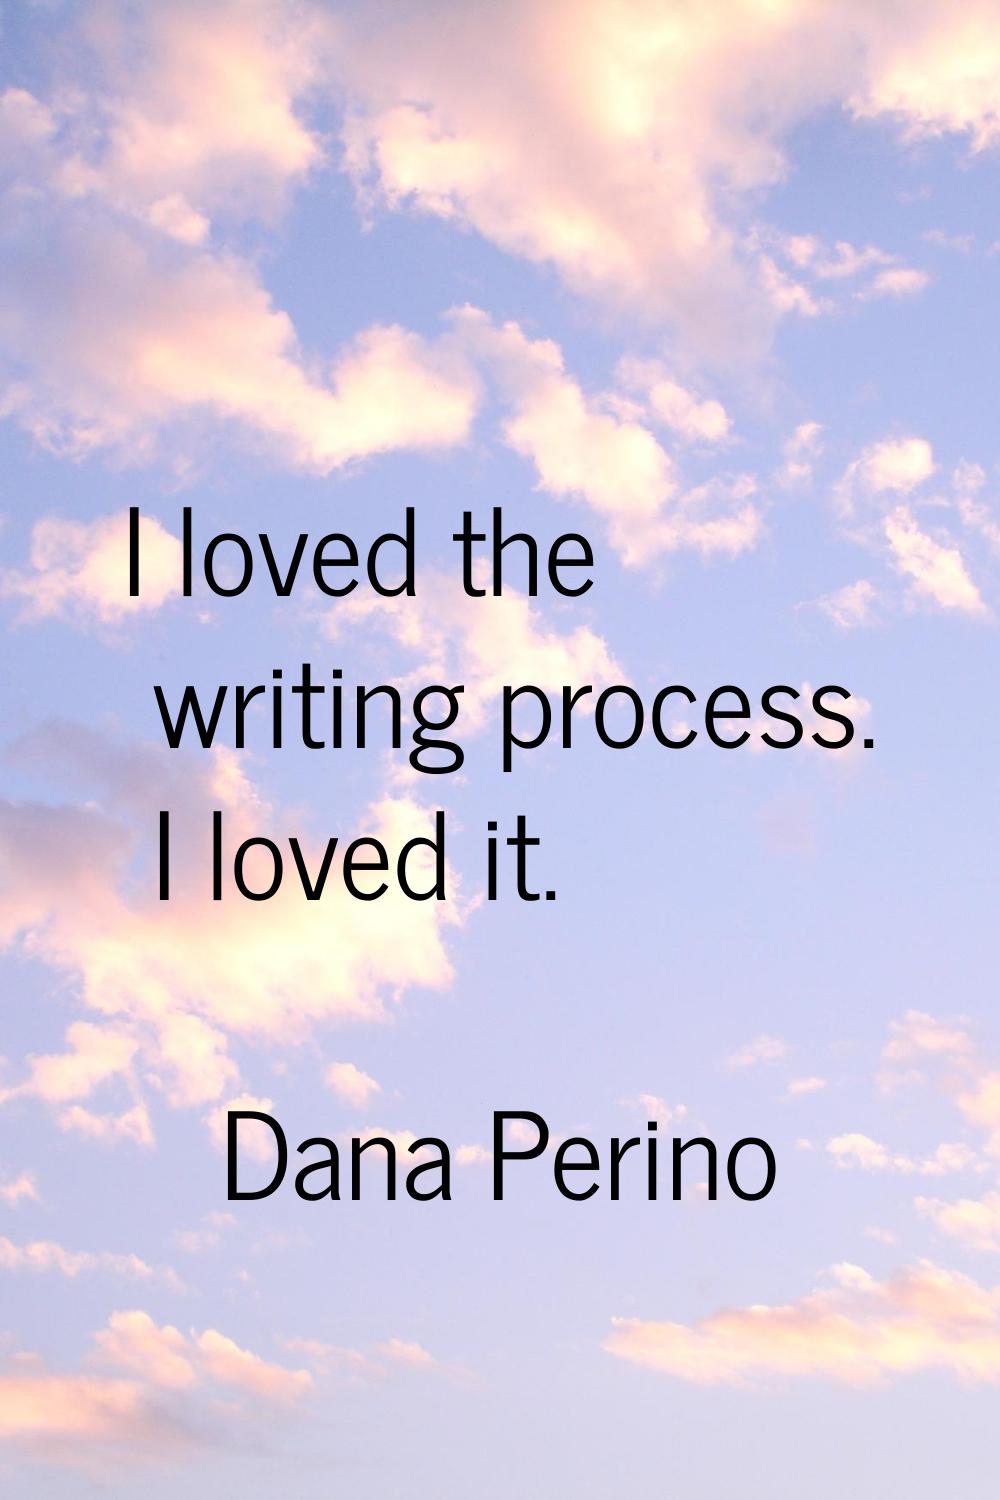 I loved the writing process. I loved it.